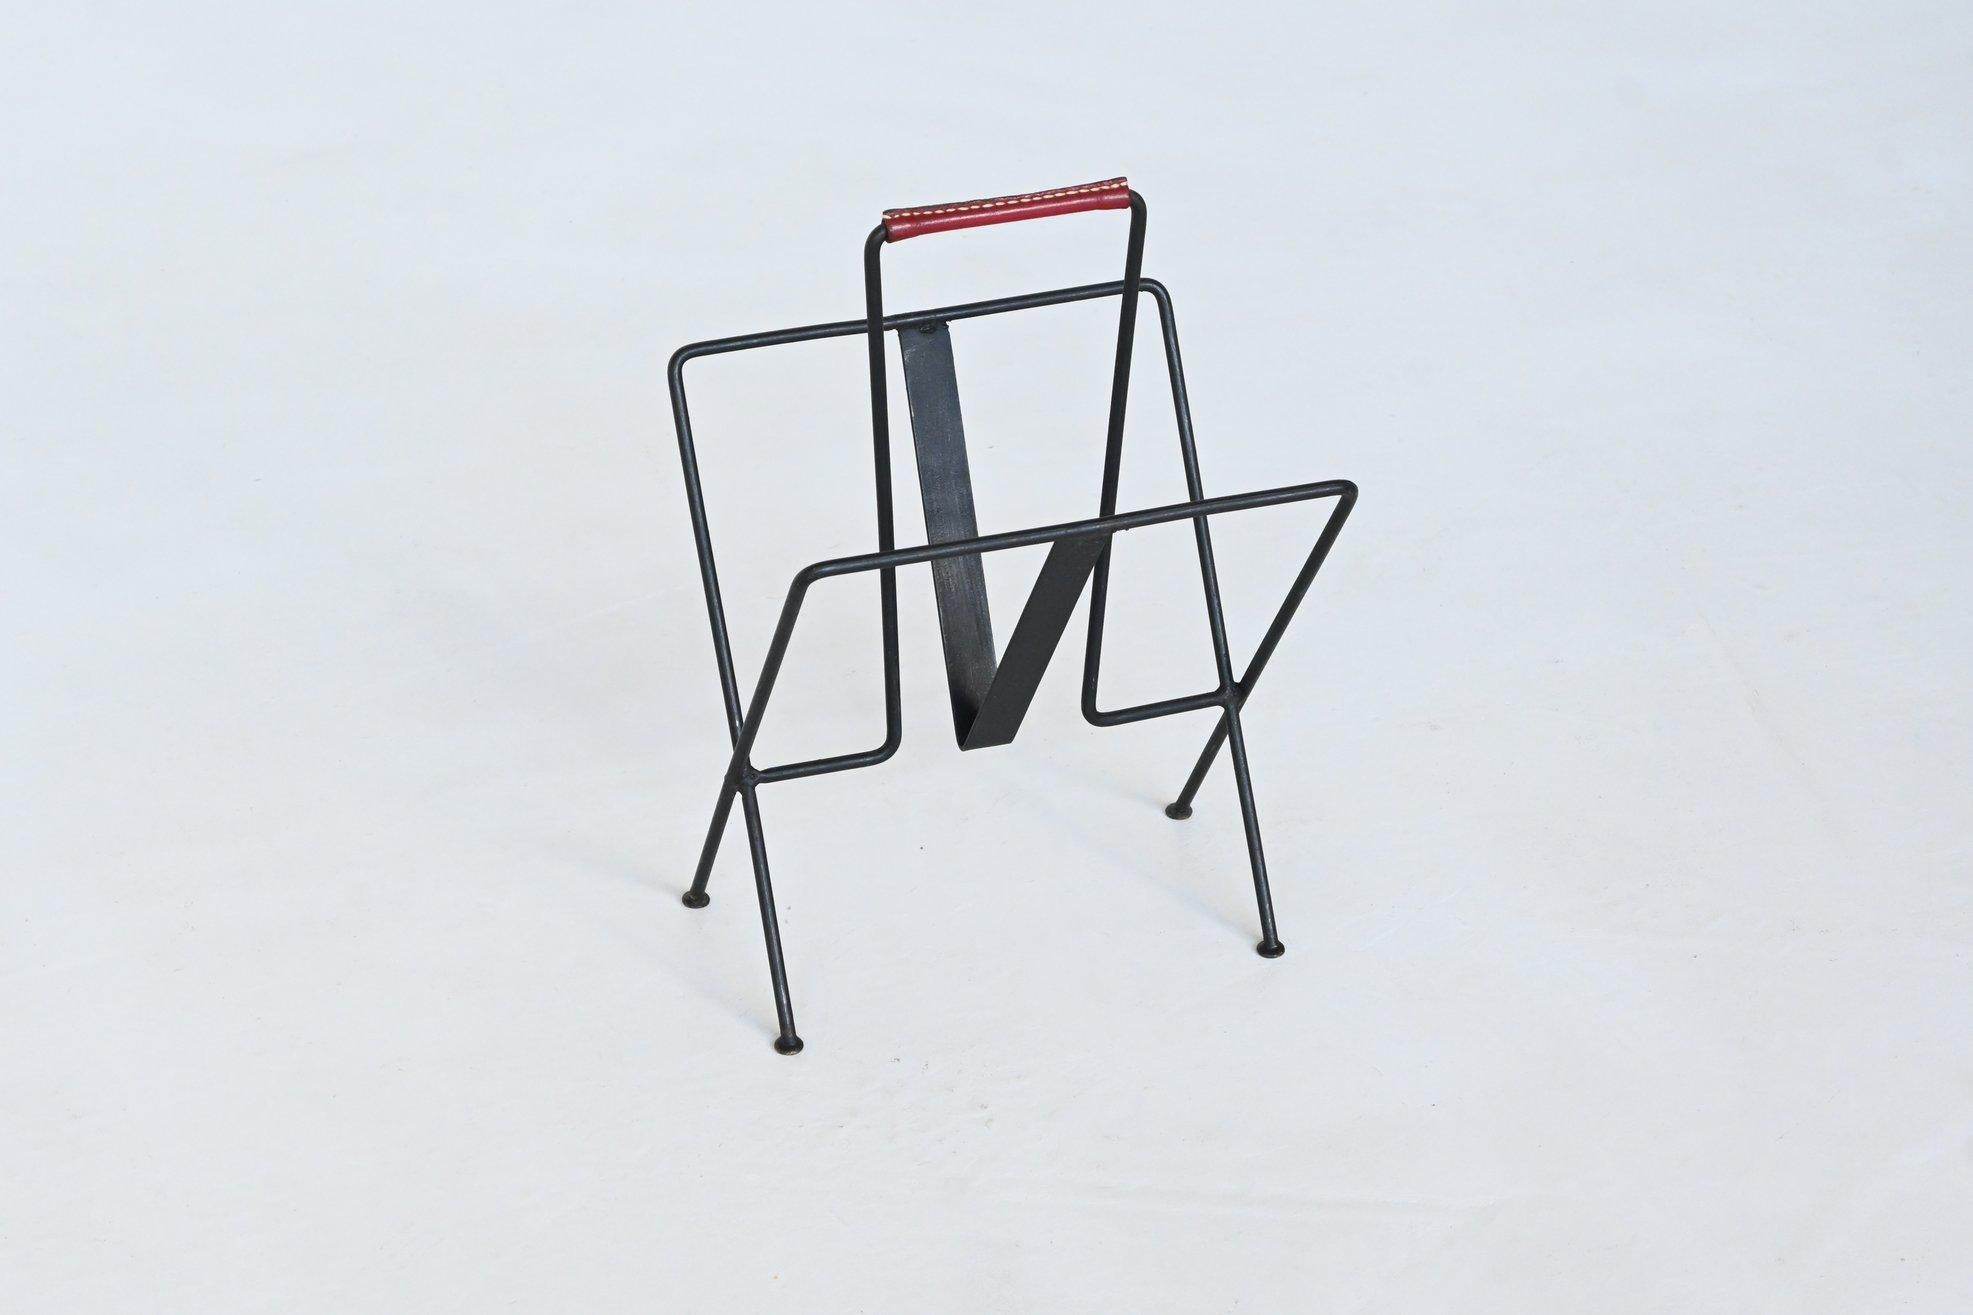 Very nice magazine stand designed by Jacques Adnet and manufactured in his own atelier, France 1950.  This highly decorative newspaper stand is made in original black lacquered metal decorated with a red handstitched Hermes Leather handle. The stand